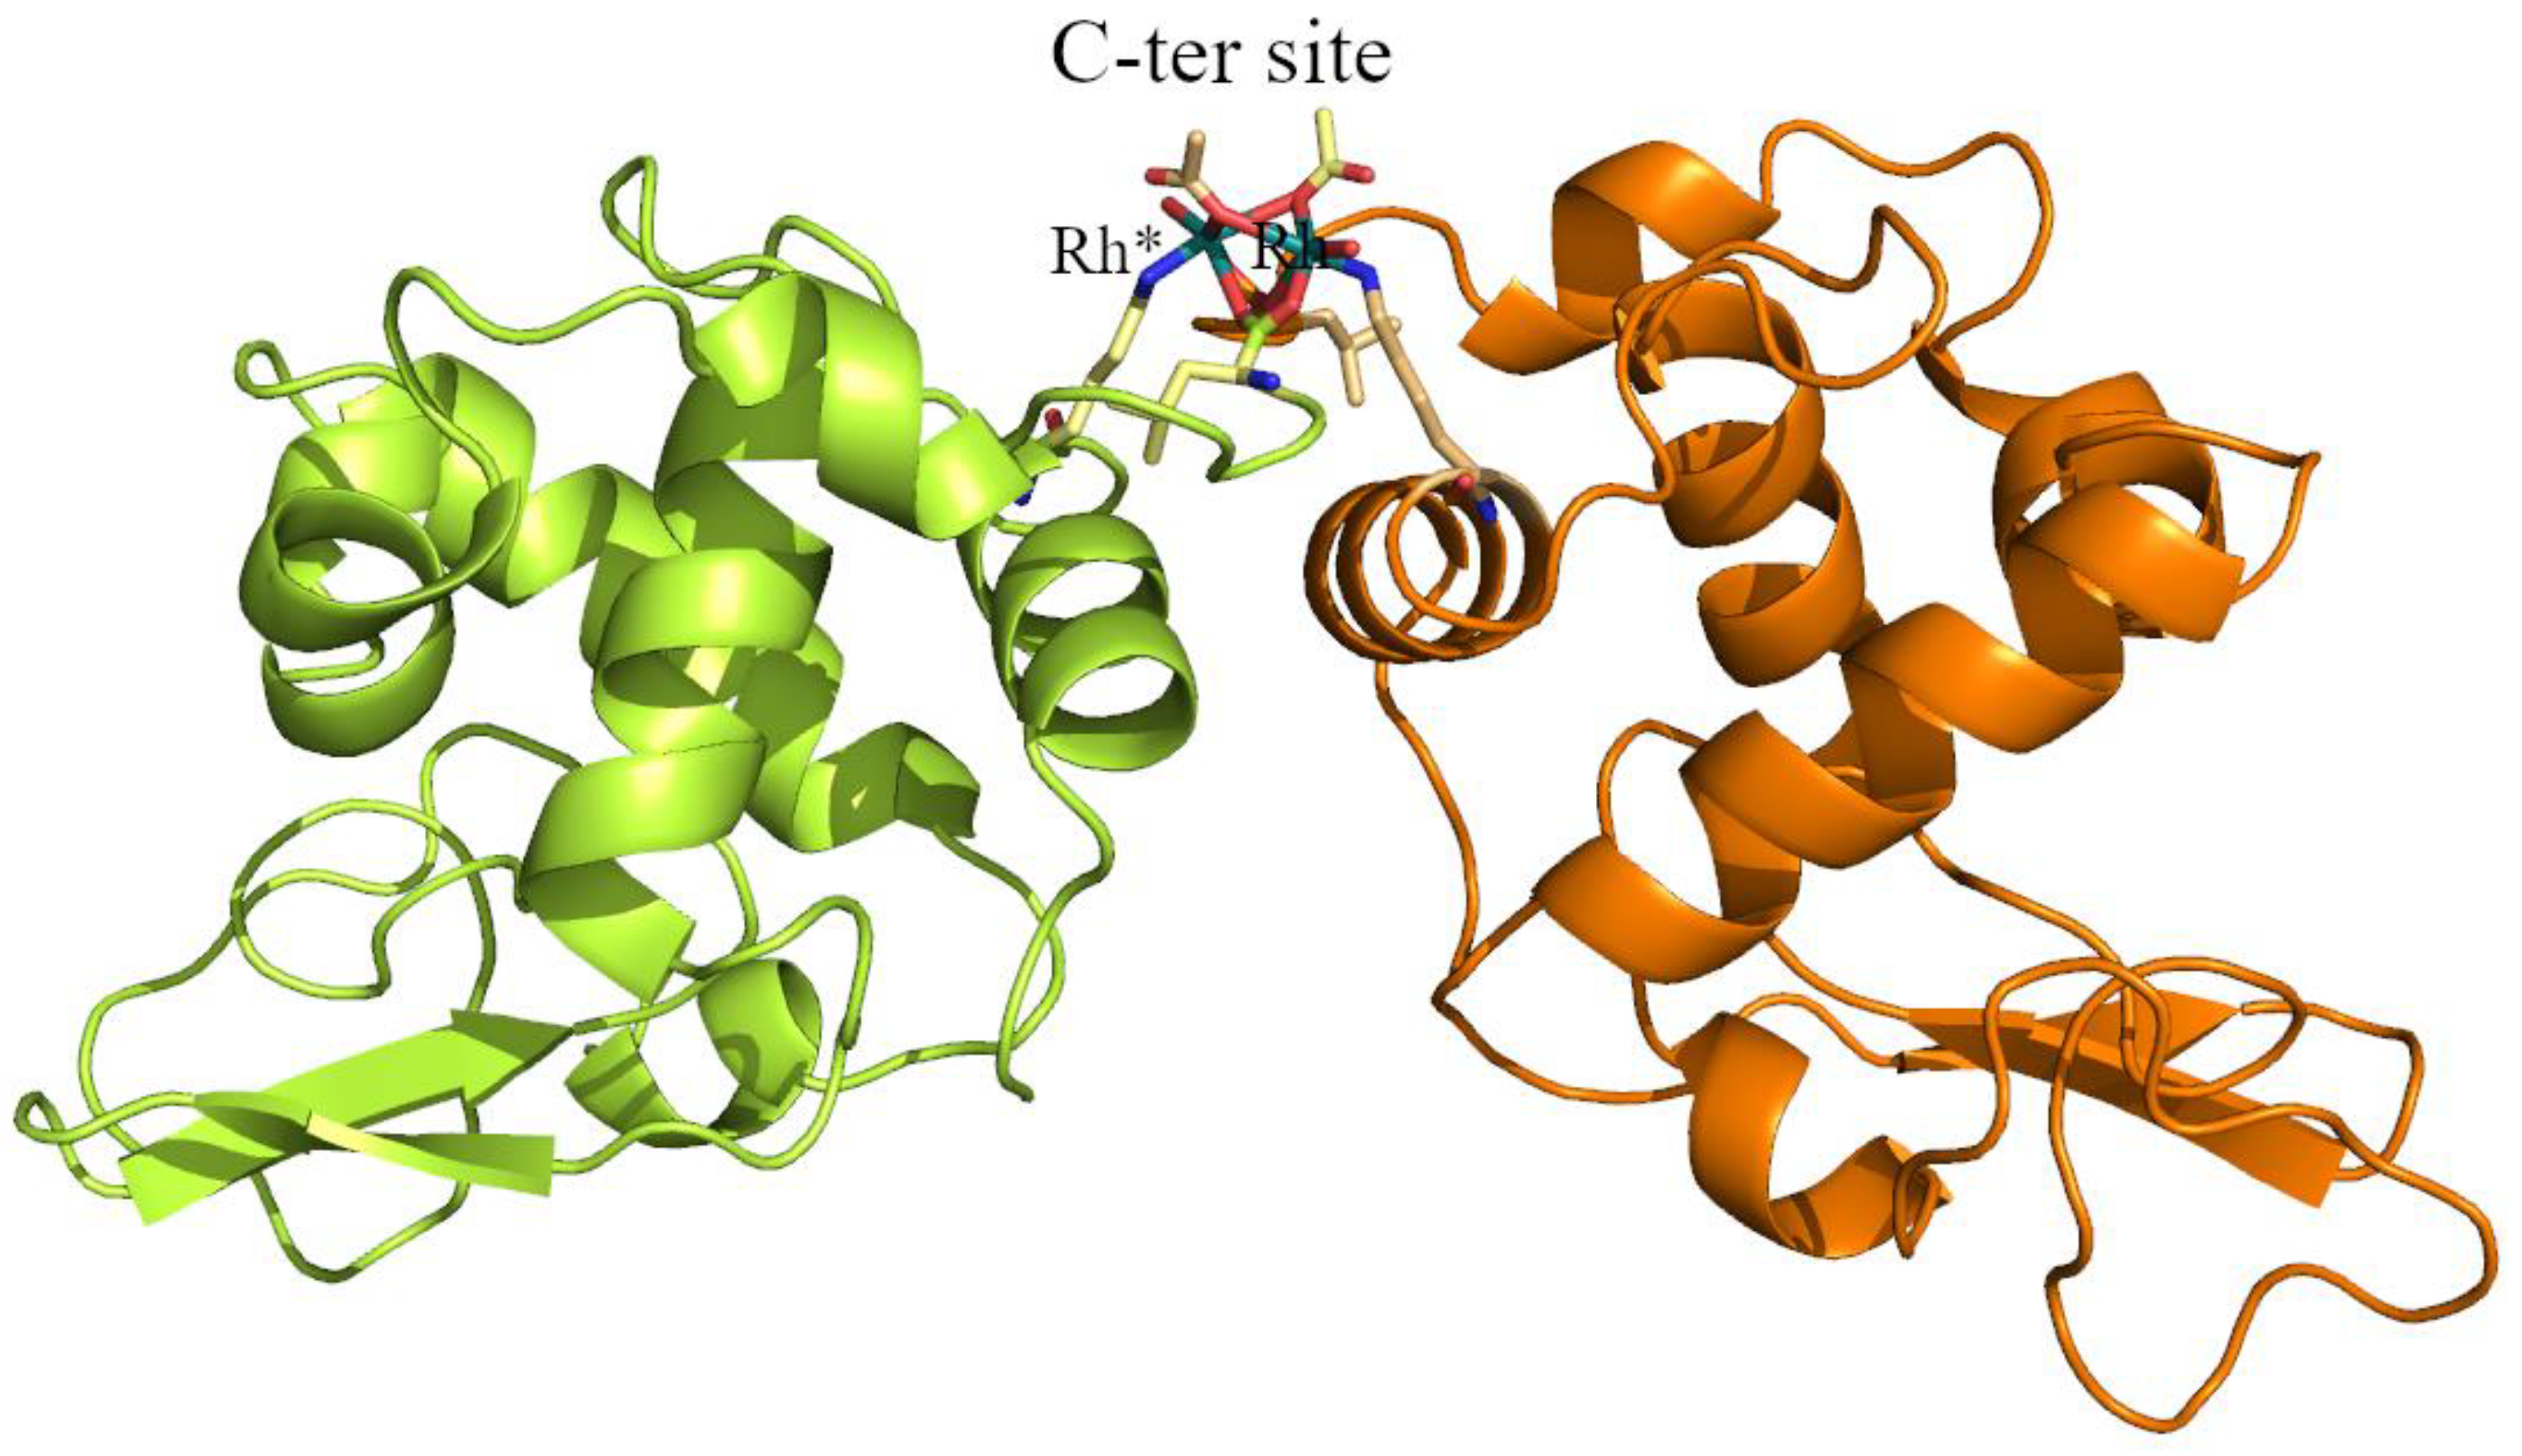 Ijms Free Full Text Unusual Structural Features In The Adduct Of Dirhodium Tetraacetate With Lysozyme Html